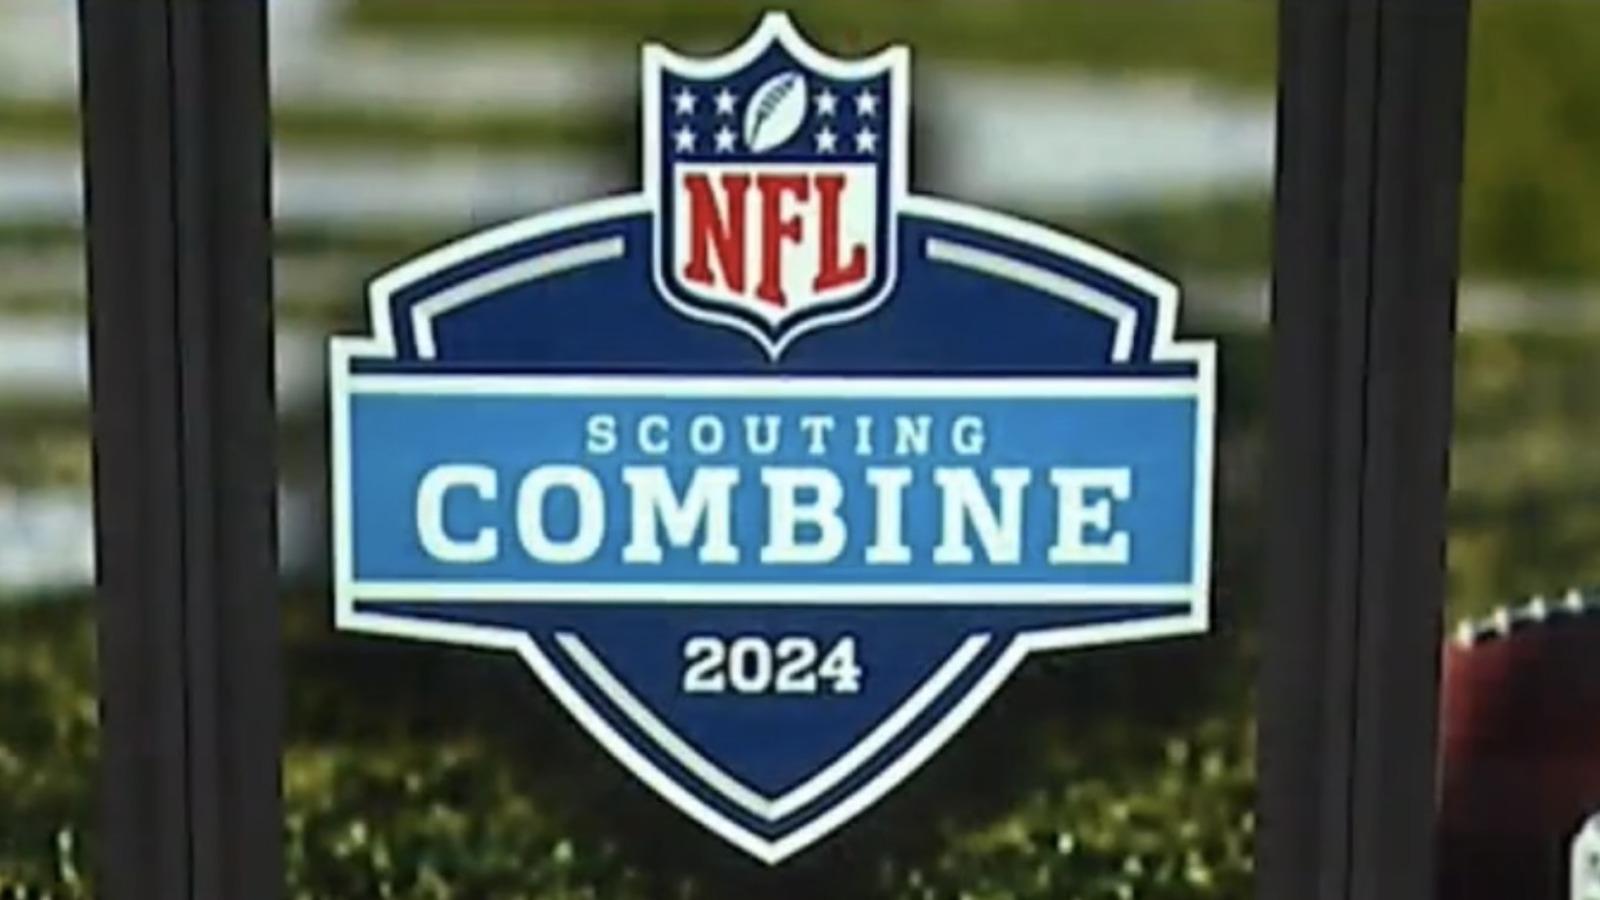 The 2024 NFL Scouting Combine has arrived. Over 300 prospects will undergo extensive interviews and workouts this week.